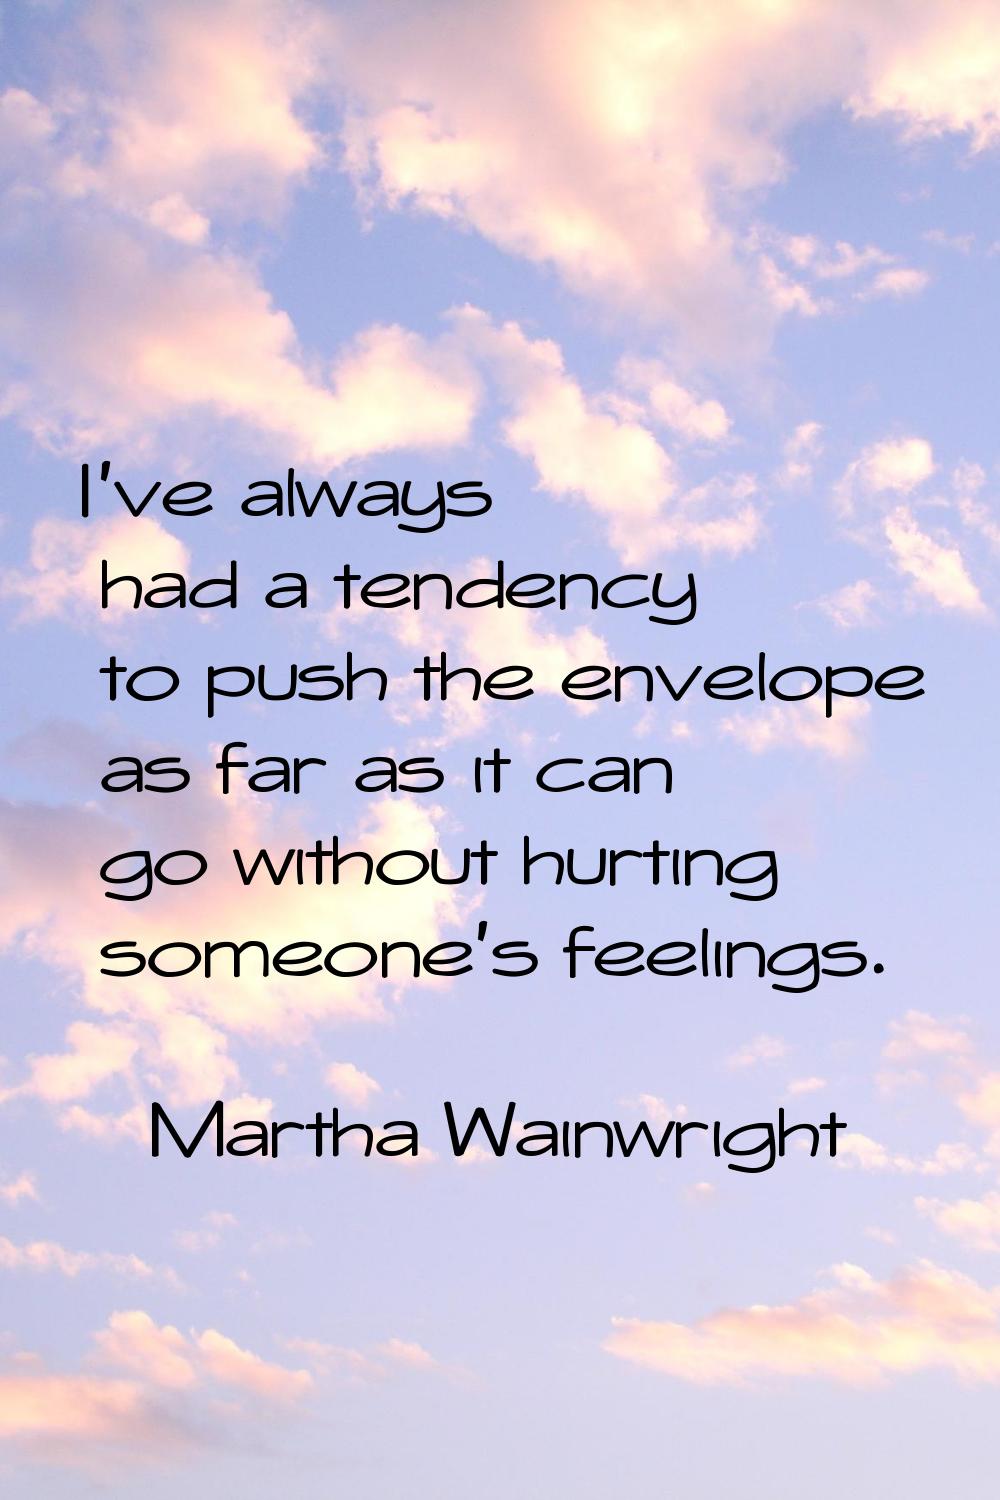 I've always had a tendency to push the envelope as far as it can go without hurting someone's feeli